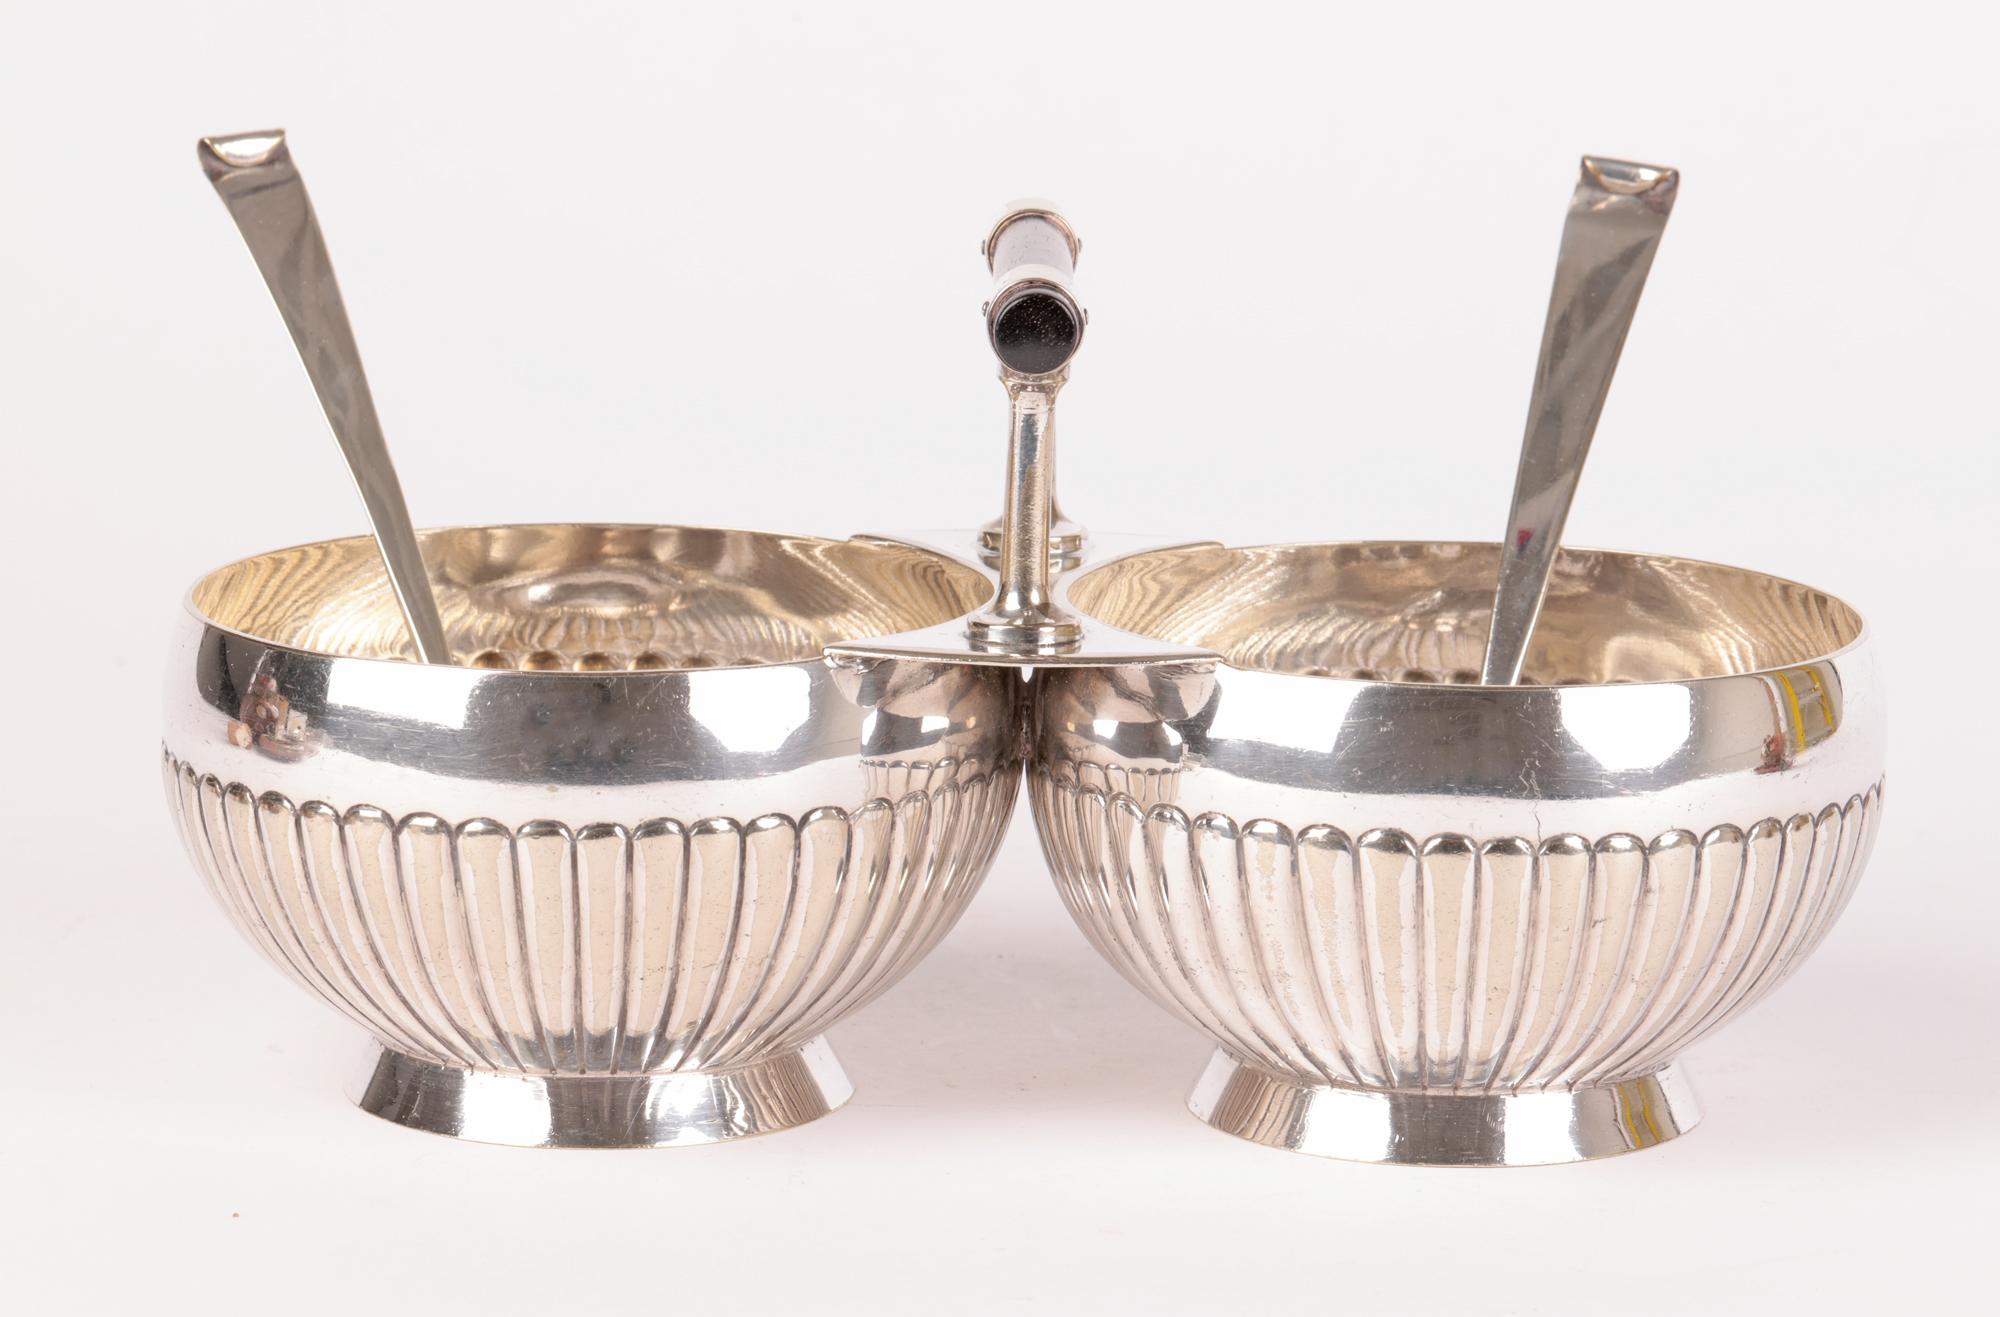 Late 19th Century Christopher Dresser for Hukin & Heath Silver Plated Sugar Bowl with Ladles